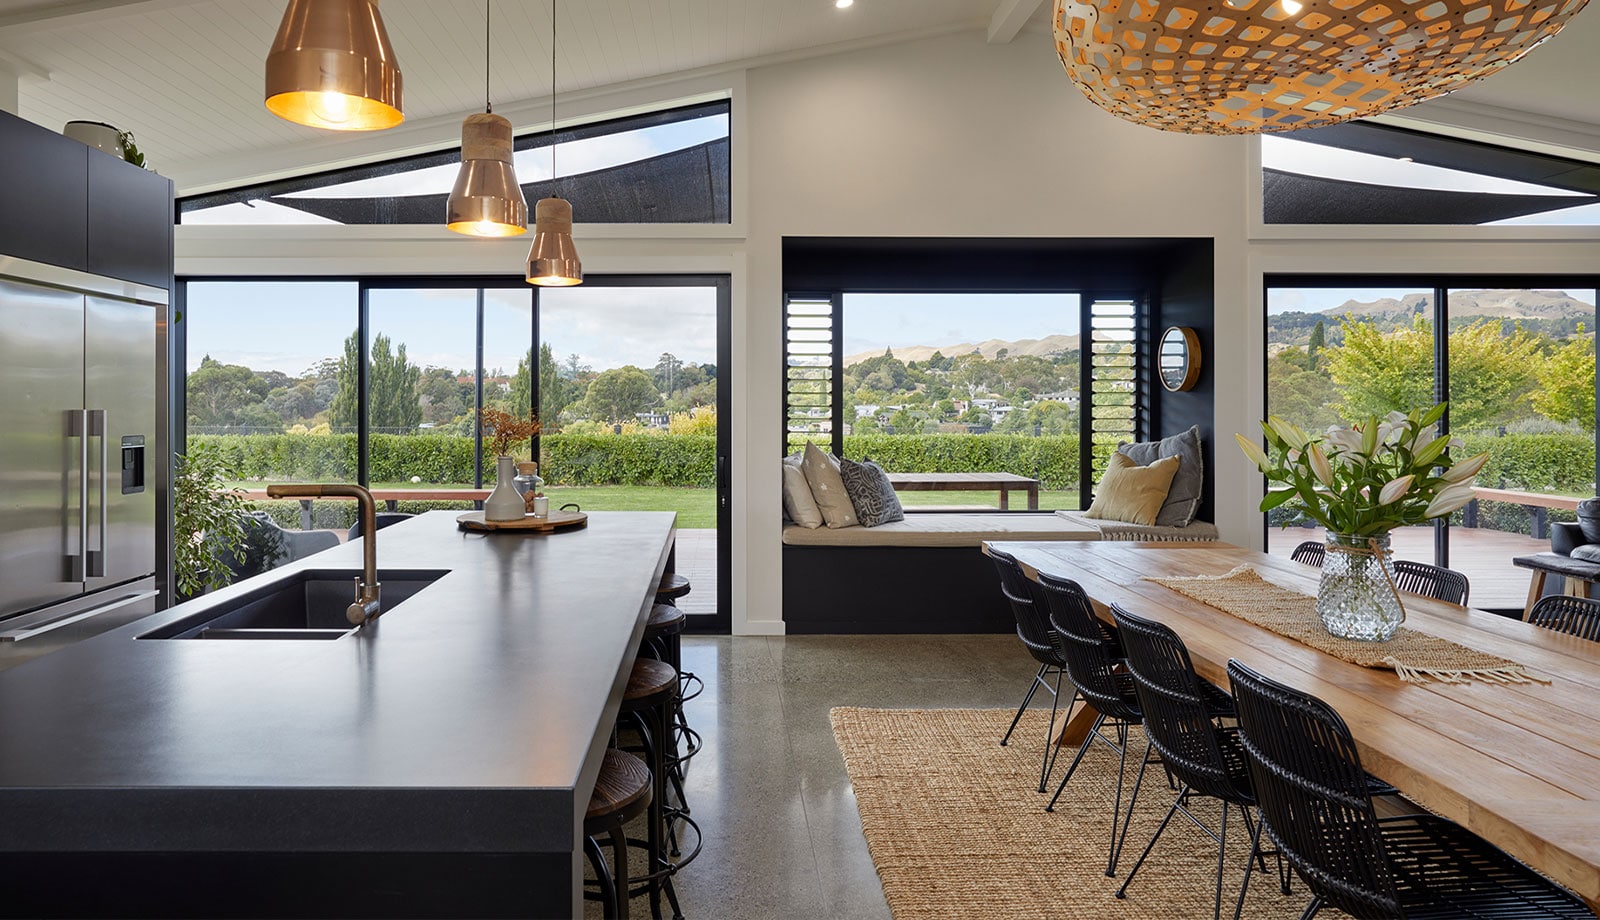 Kitchen and dining area with a view overlooking hills